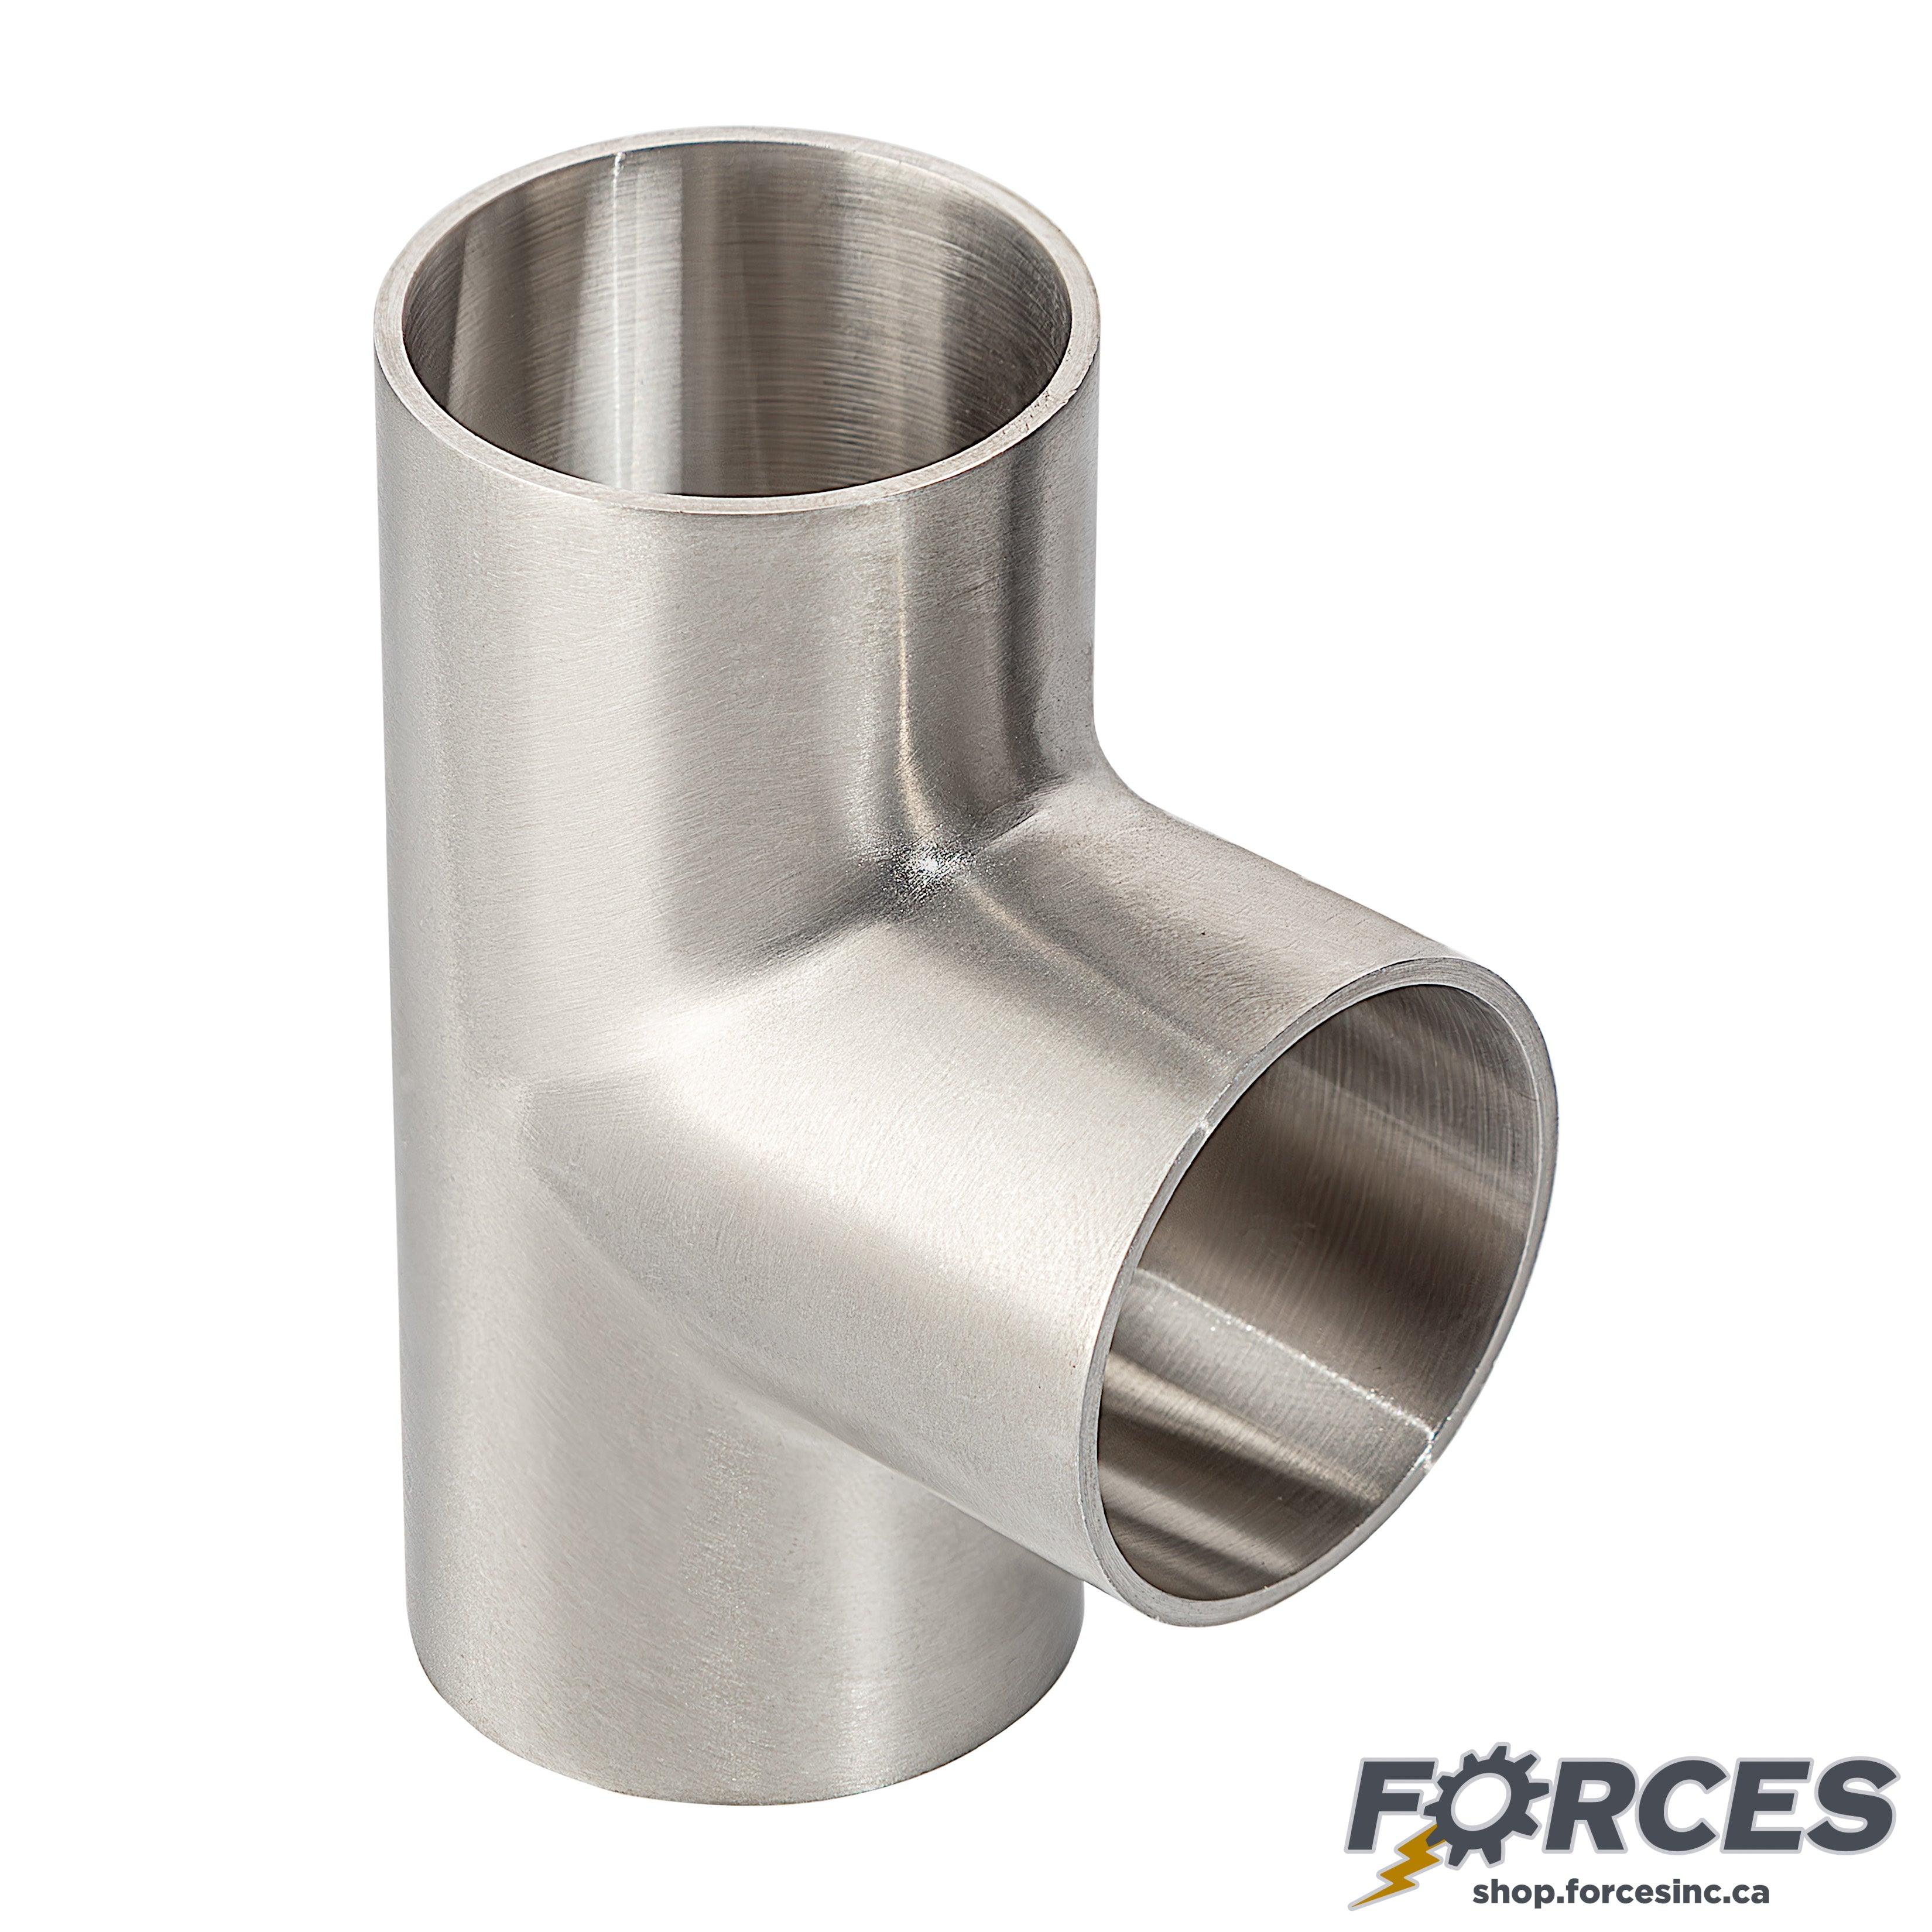 8" Butt Weld Short Tee - Stainless Steel 316 - Forces Inc